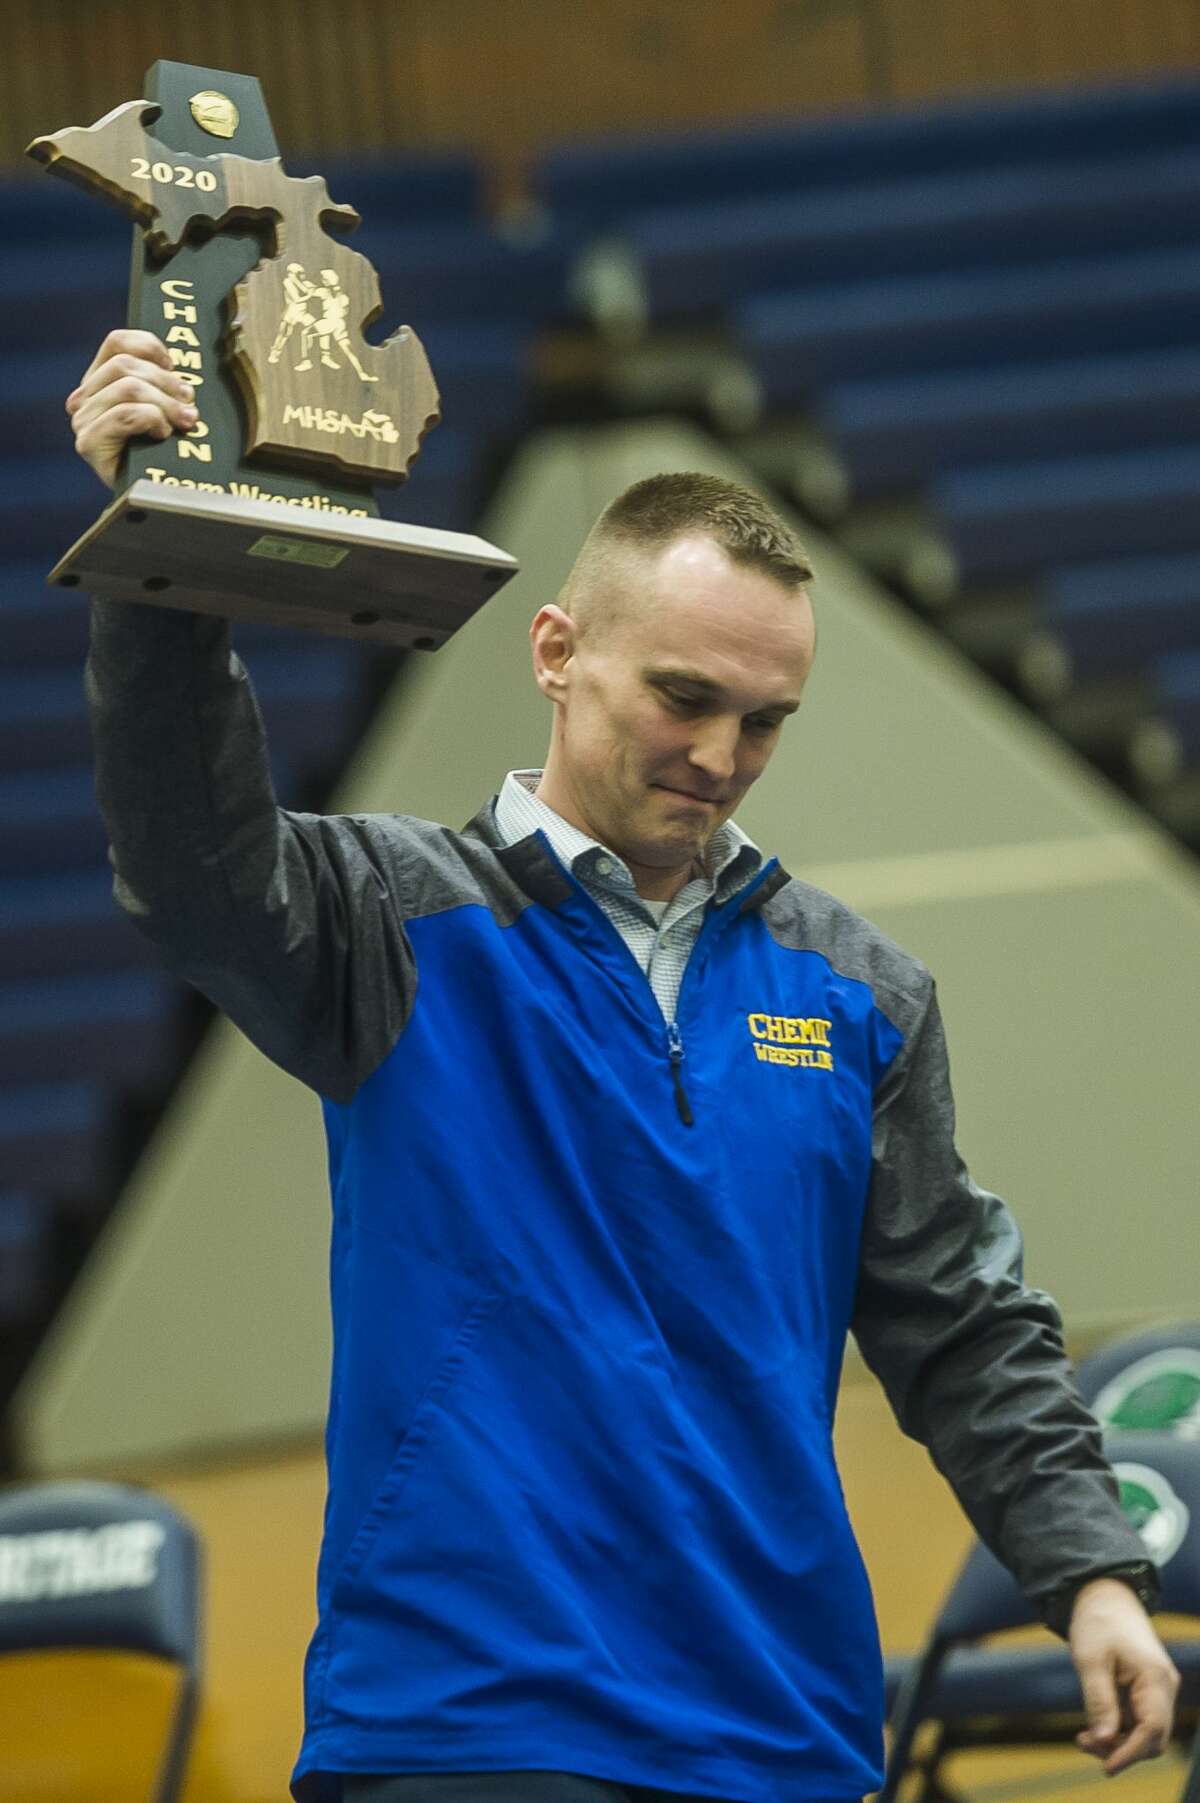 Midland High Wrestling Coach Michael Donovan holds up the chemics' trophy after their Div. 1 district championship win Wednesday, Feb. 12 at Heritage High School in Saginaw. (Katy Kildee/kkildee@mdn.net)